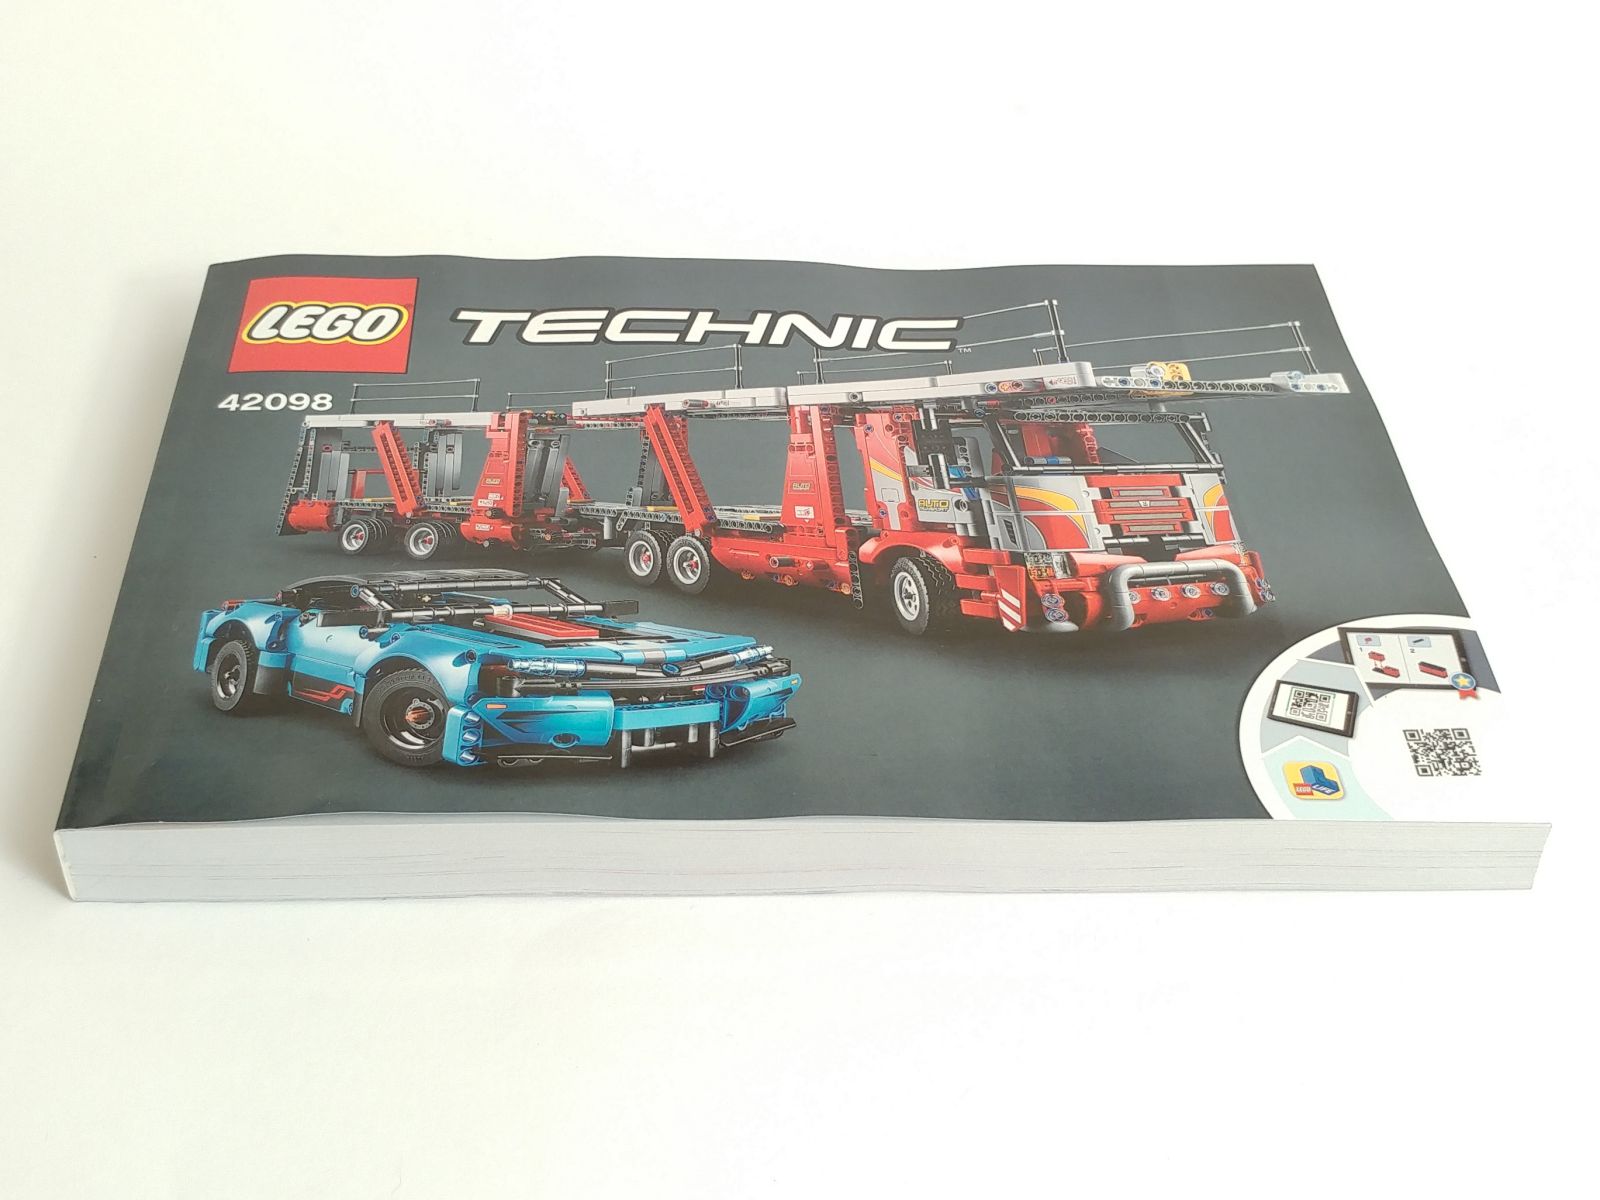 LEGO® Technic review: Car Transporter (part 1) | New Elementary: LEGO® parts, sets and